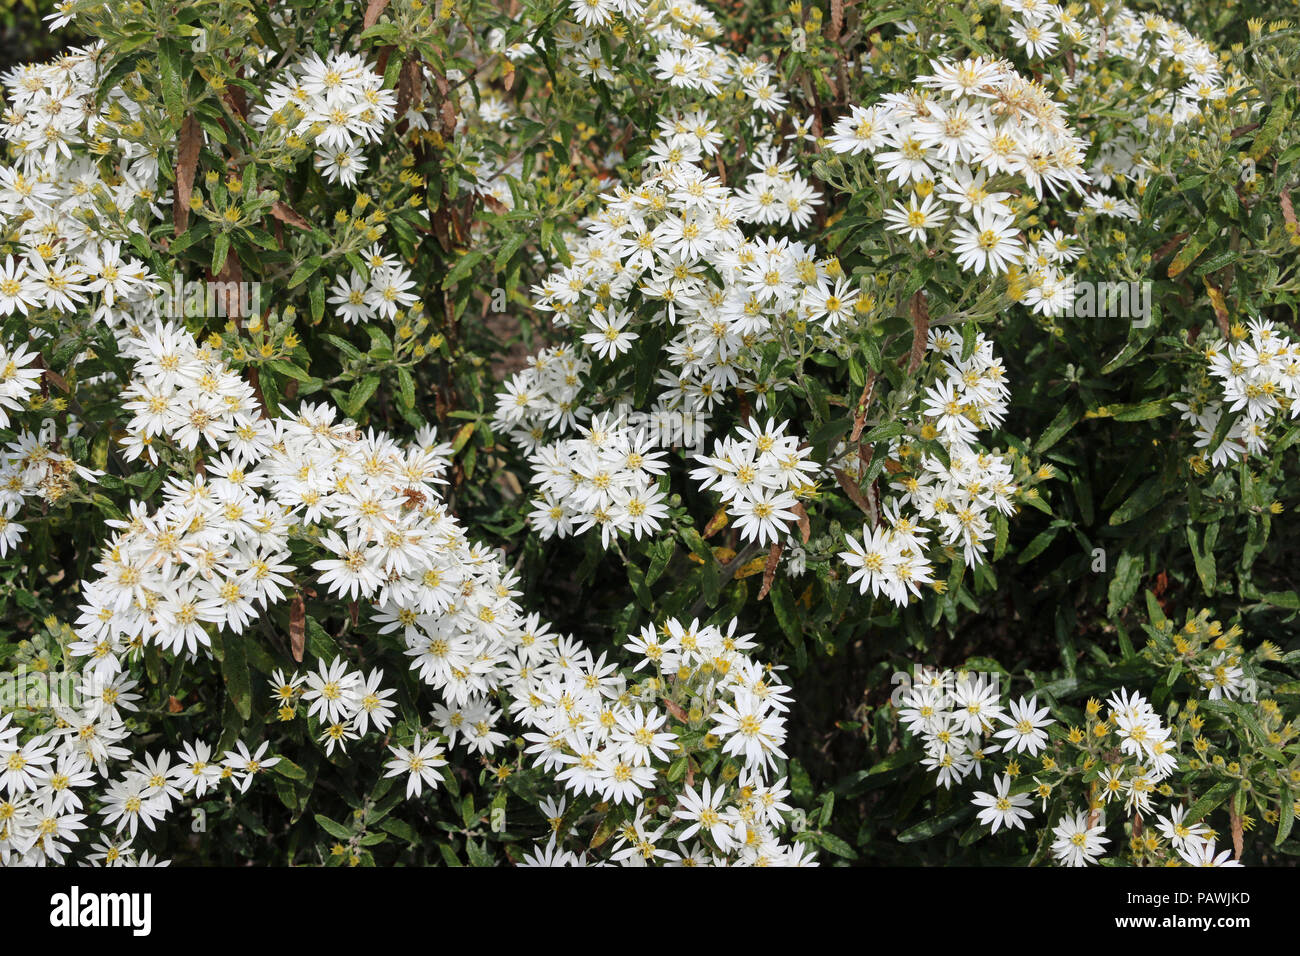 Scilly daisy bush (Olearia x scilloniensis) in full flower with a background of leaves of the same plant. Stock Photo